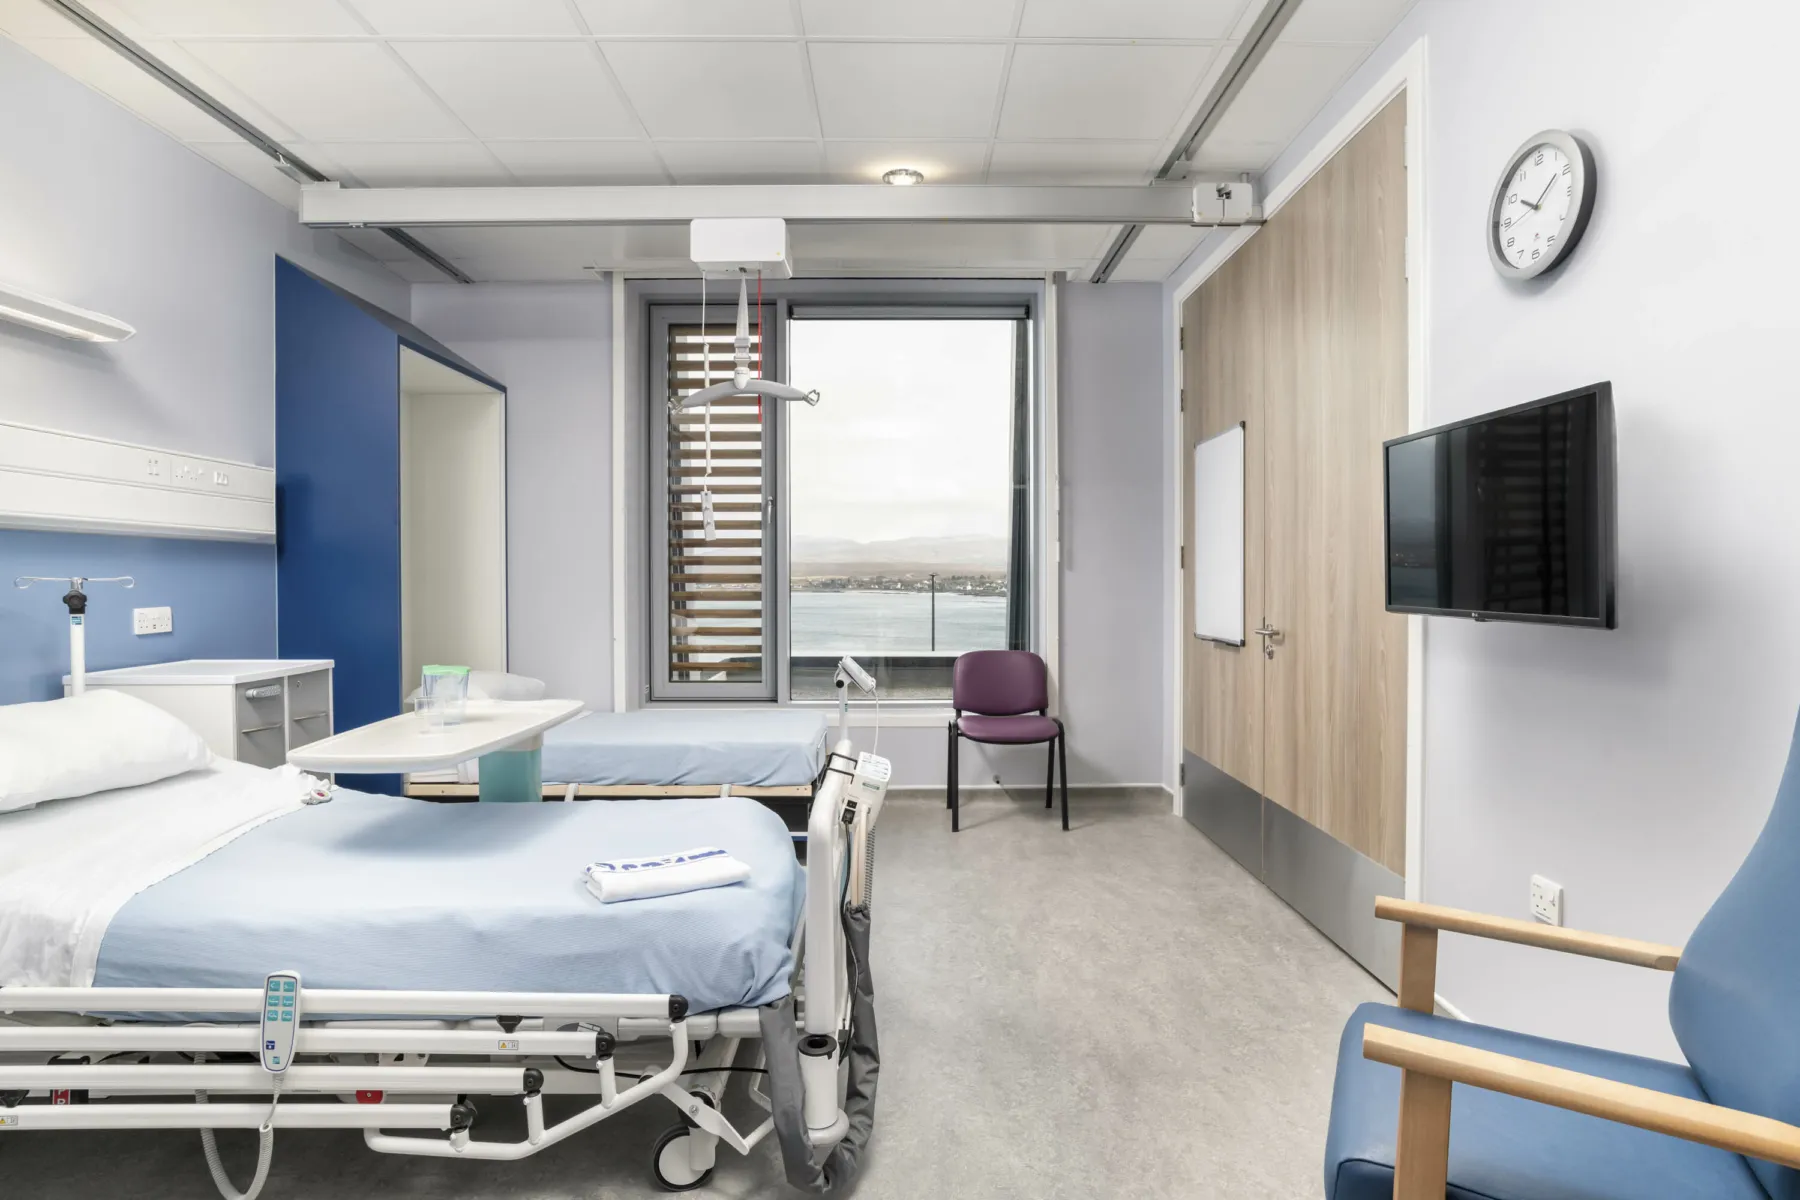 Inside a small ward at the rural new build hospital at Broadford on Skye. Two beds have a view out over the sea and there are chairs for visitors.